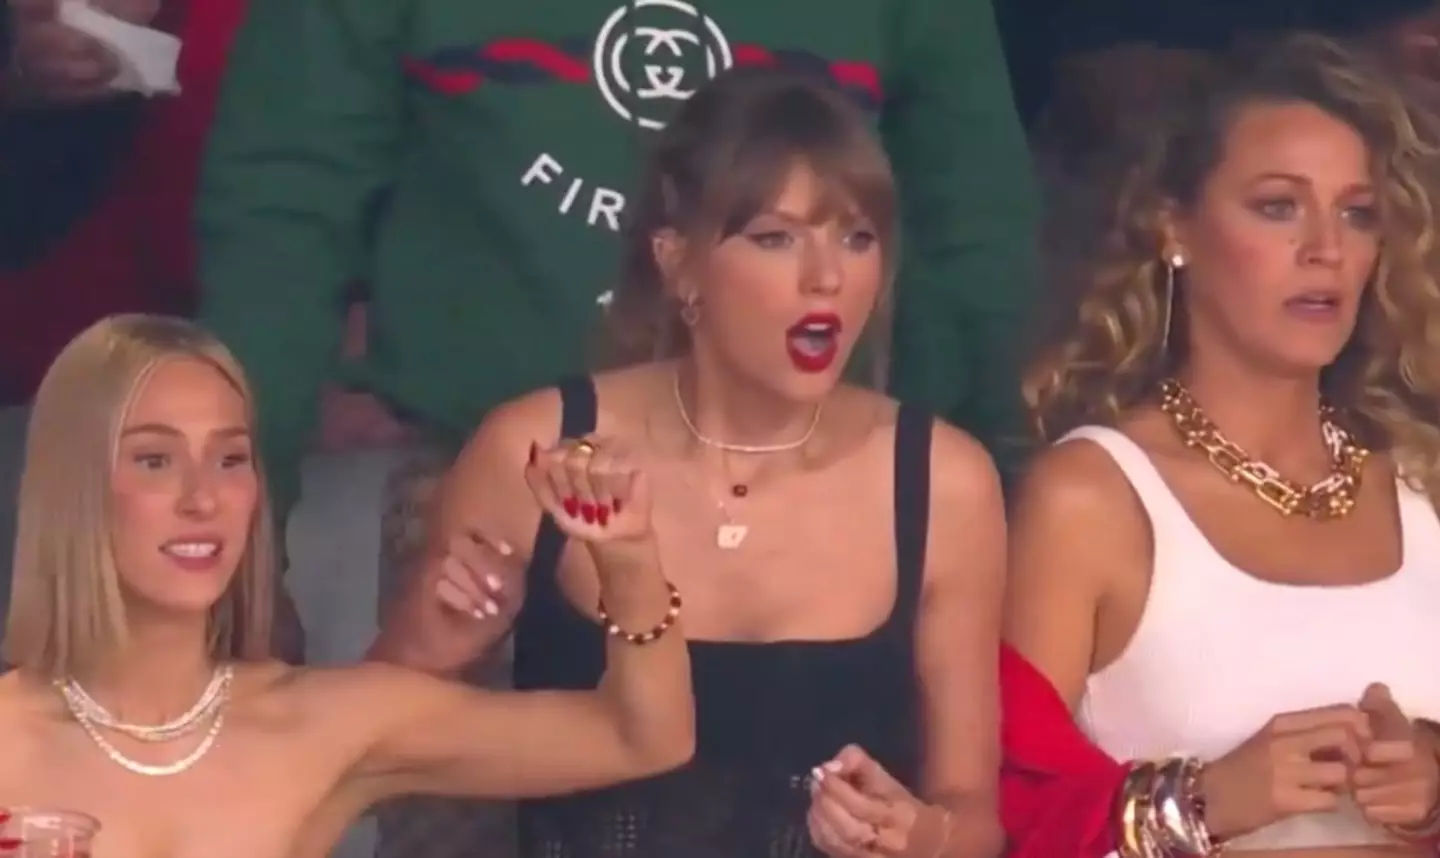 Blake Lively and Taylor Swift were seen intently watching the game unfold.